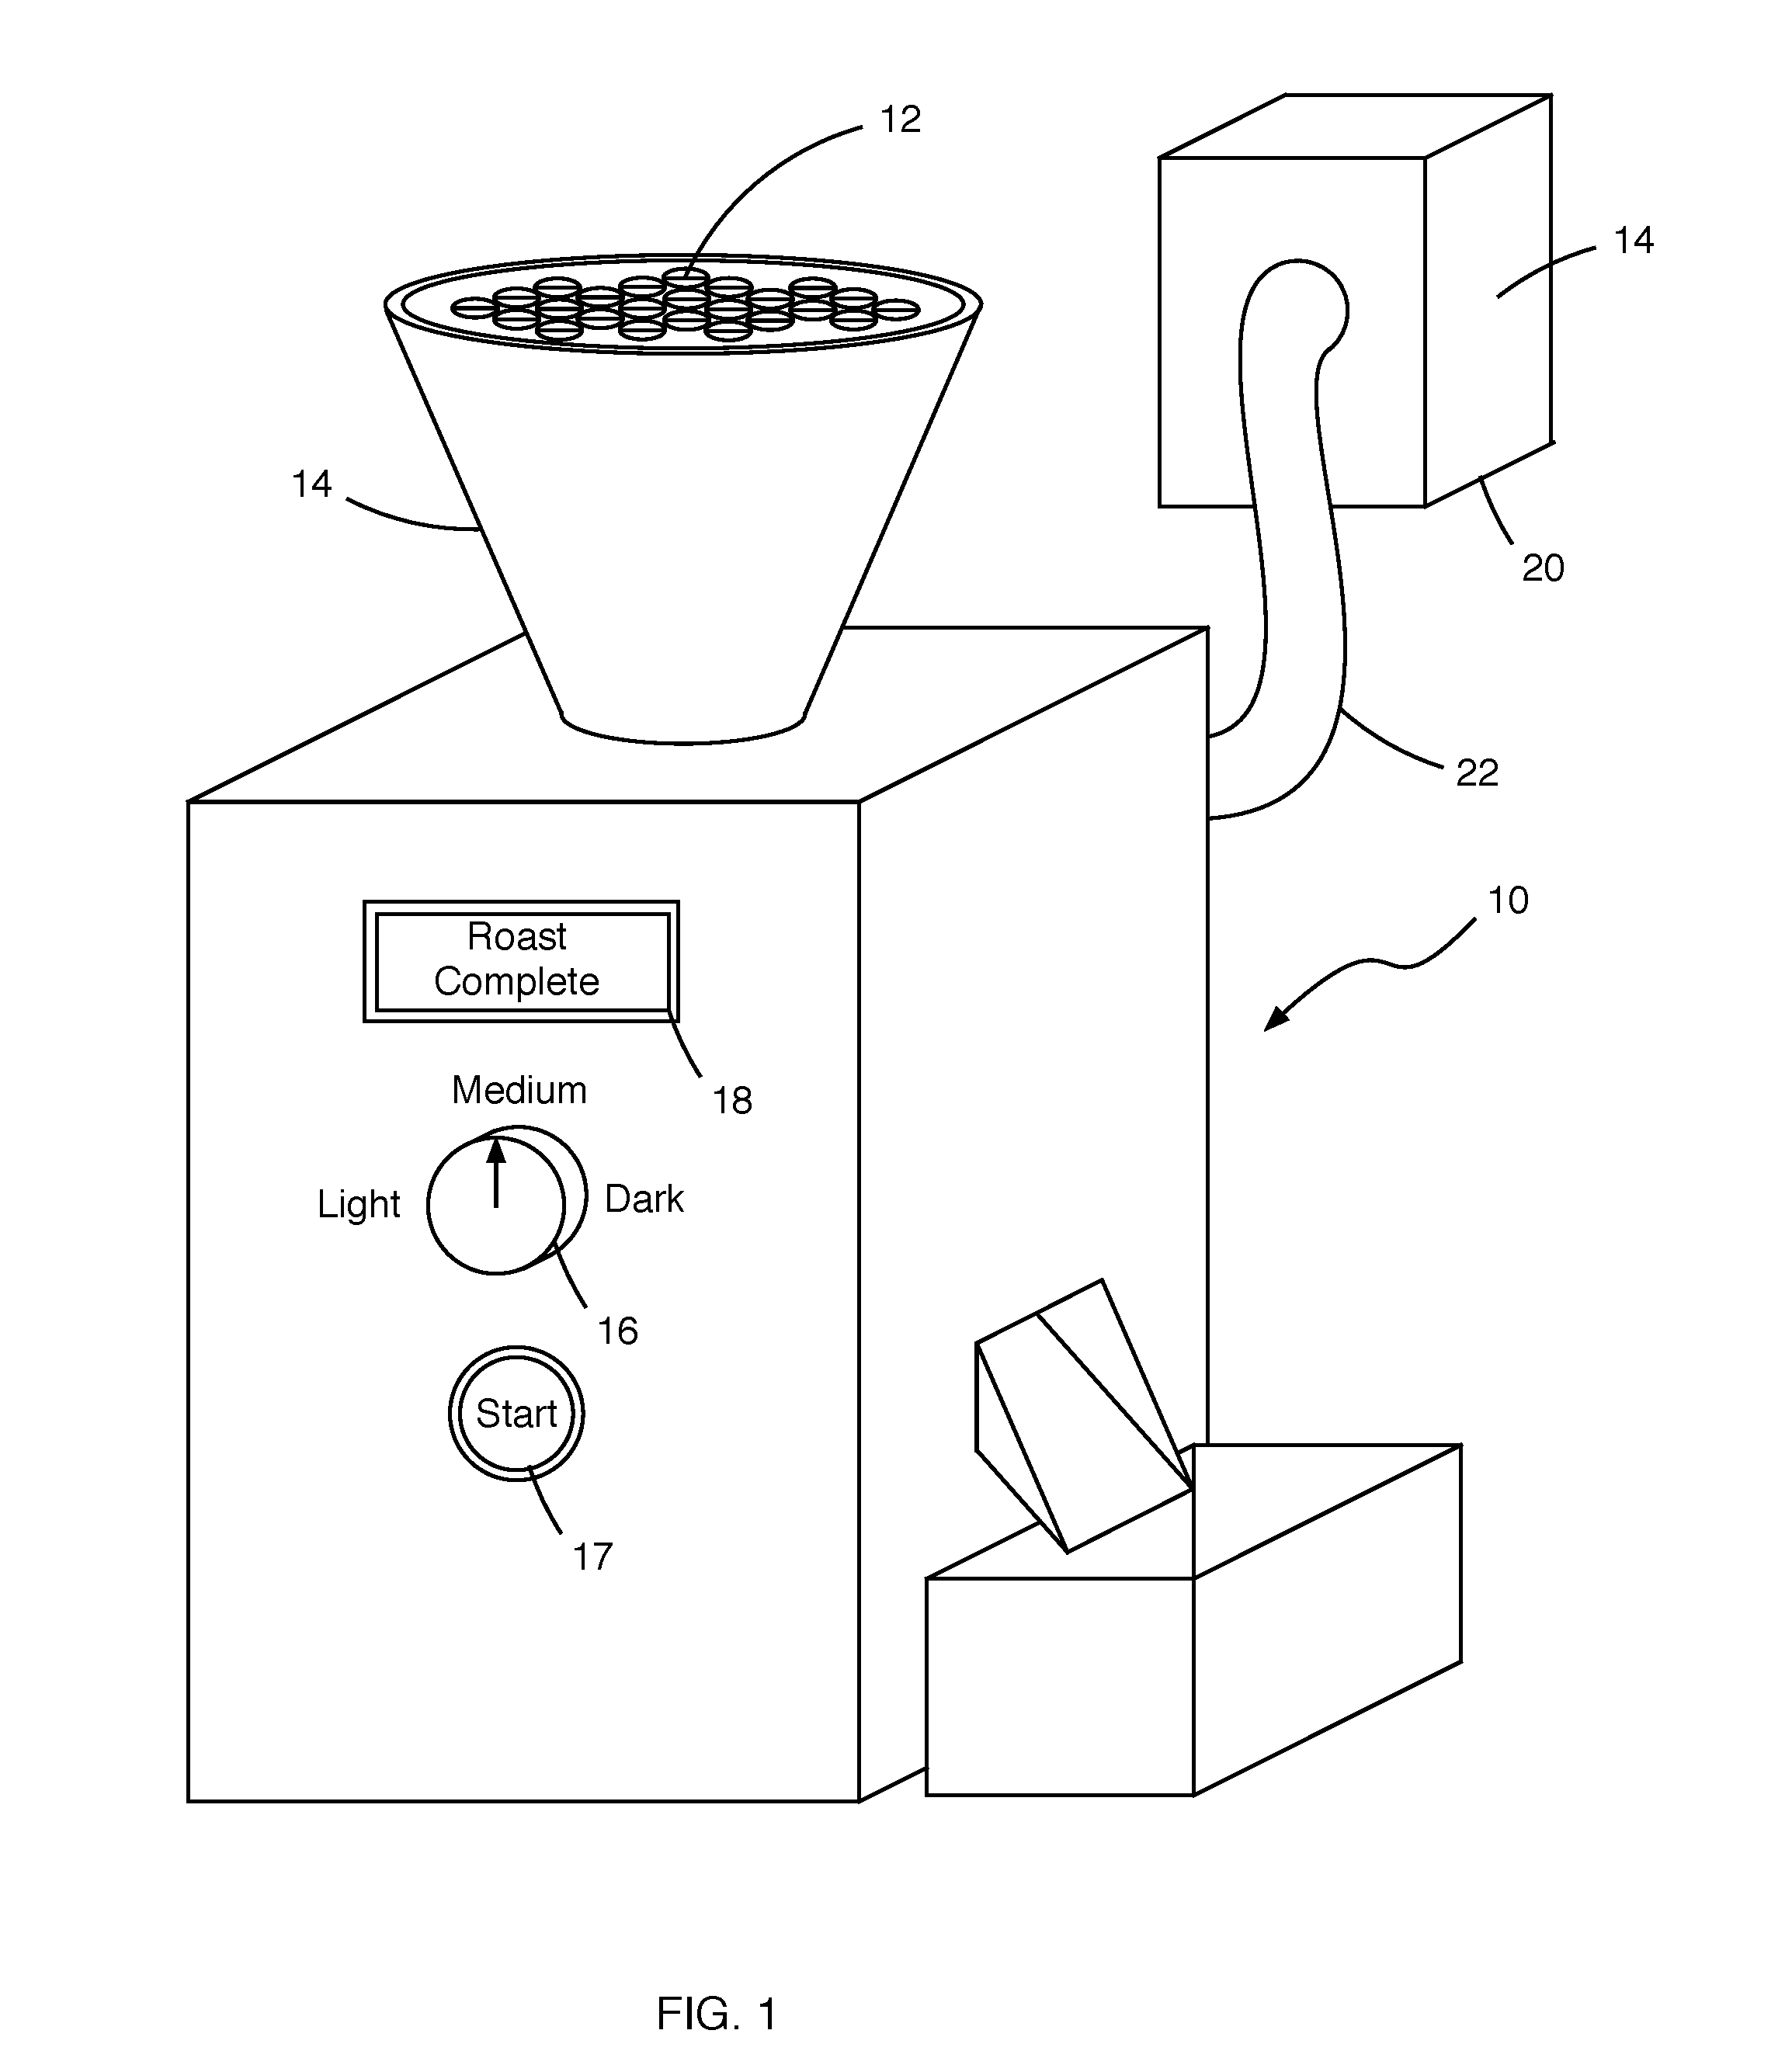 Apparatus and system for roasting coffee beans